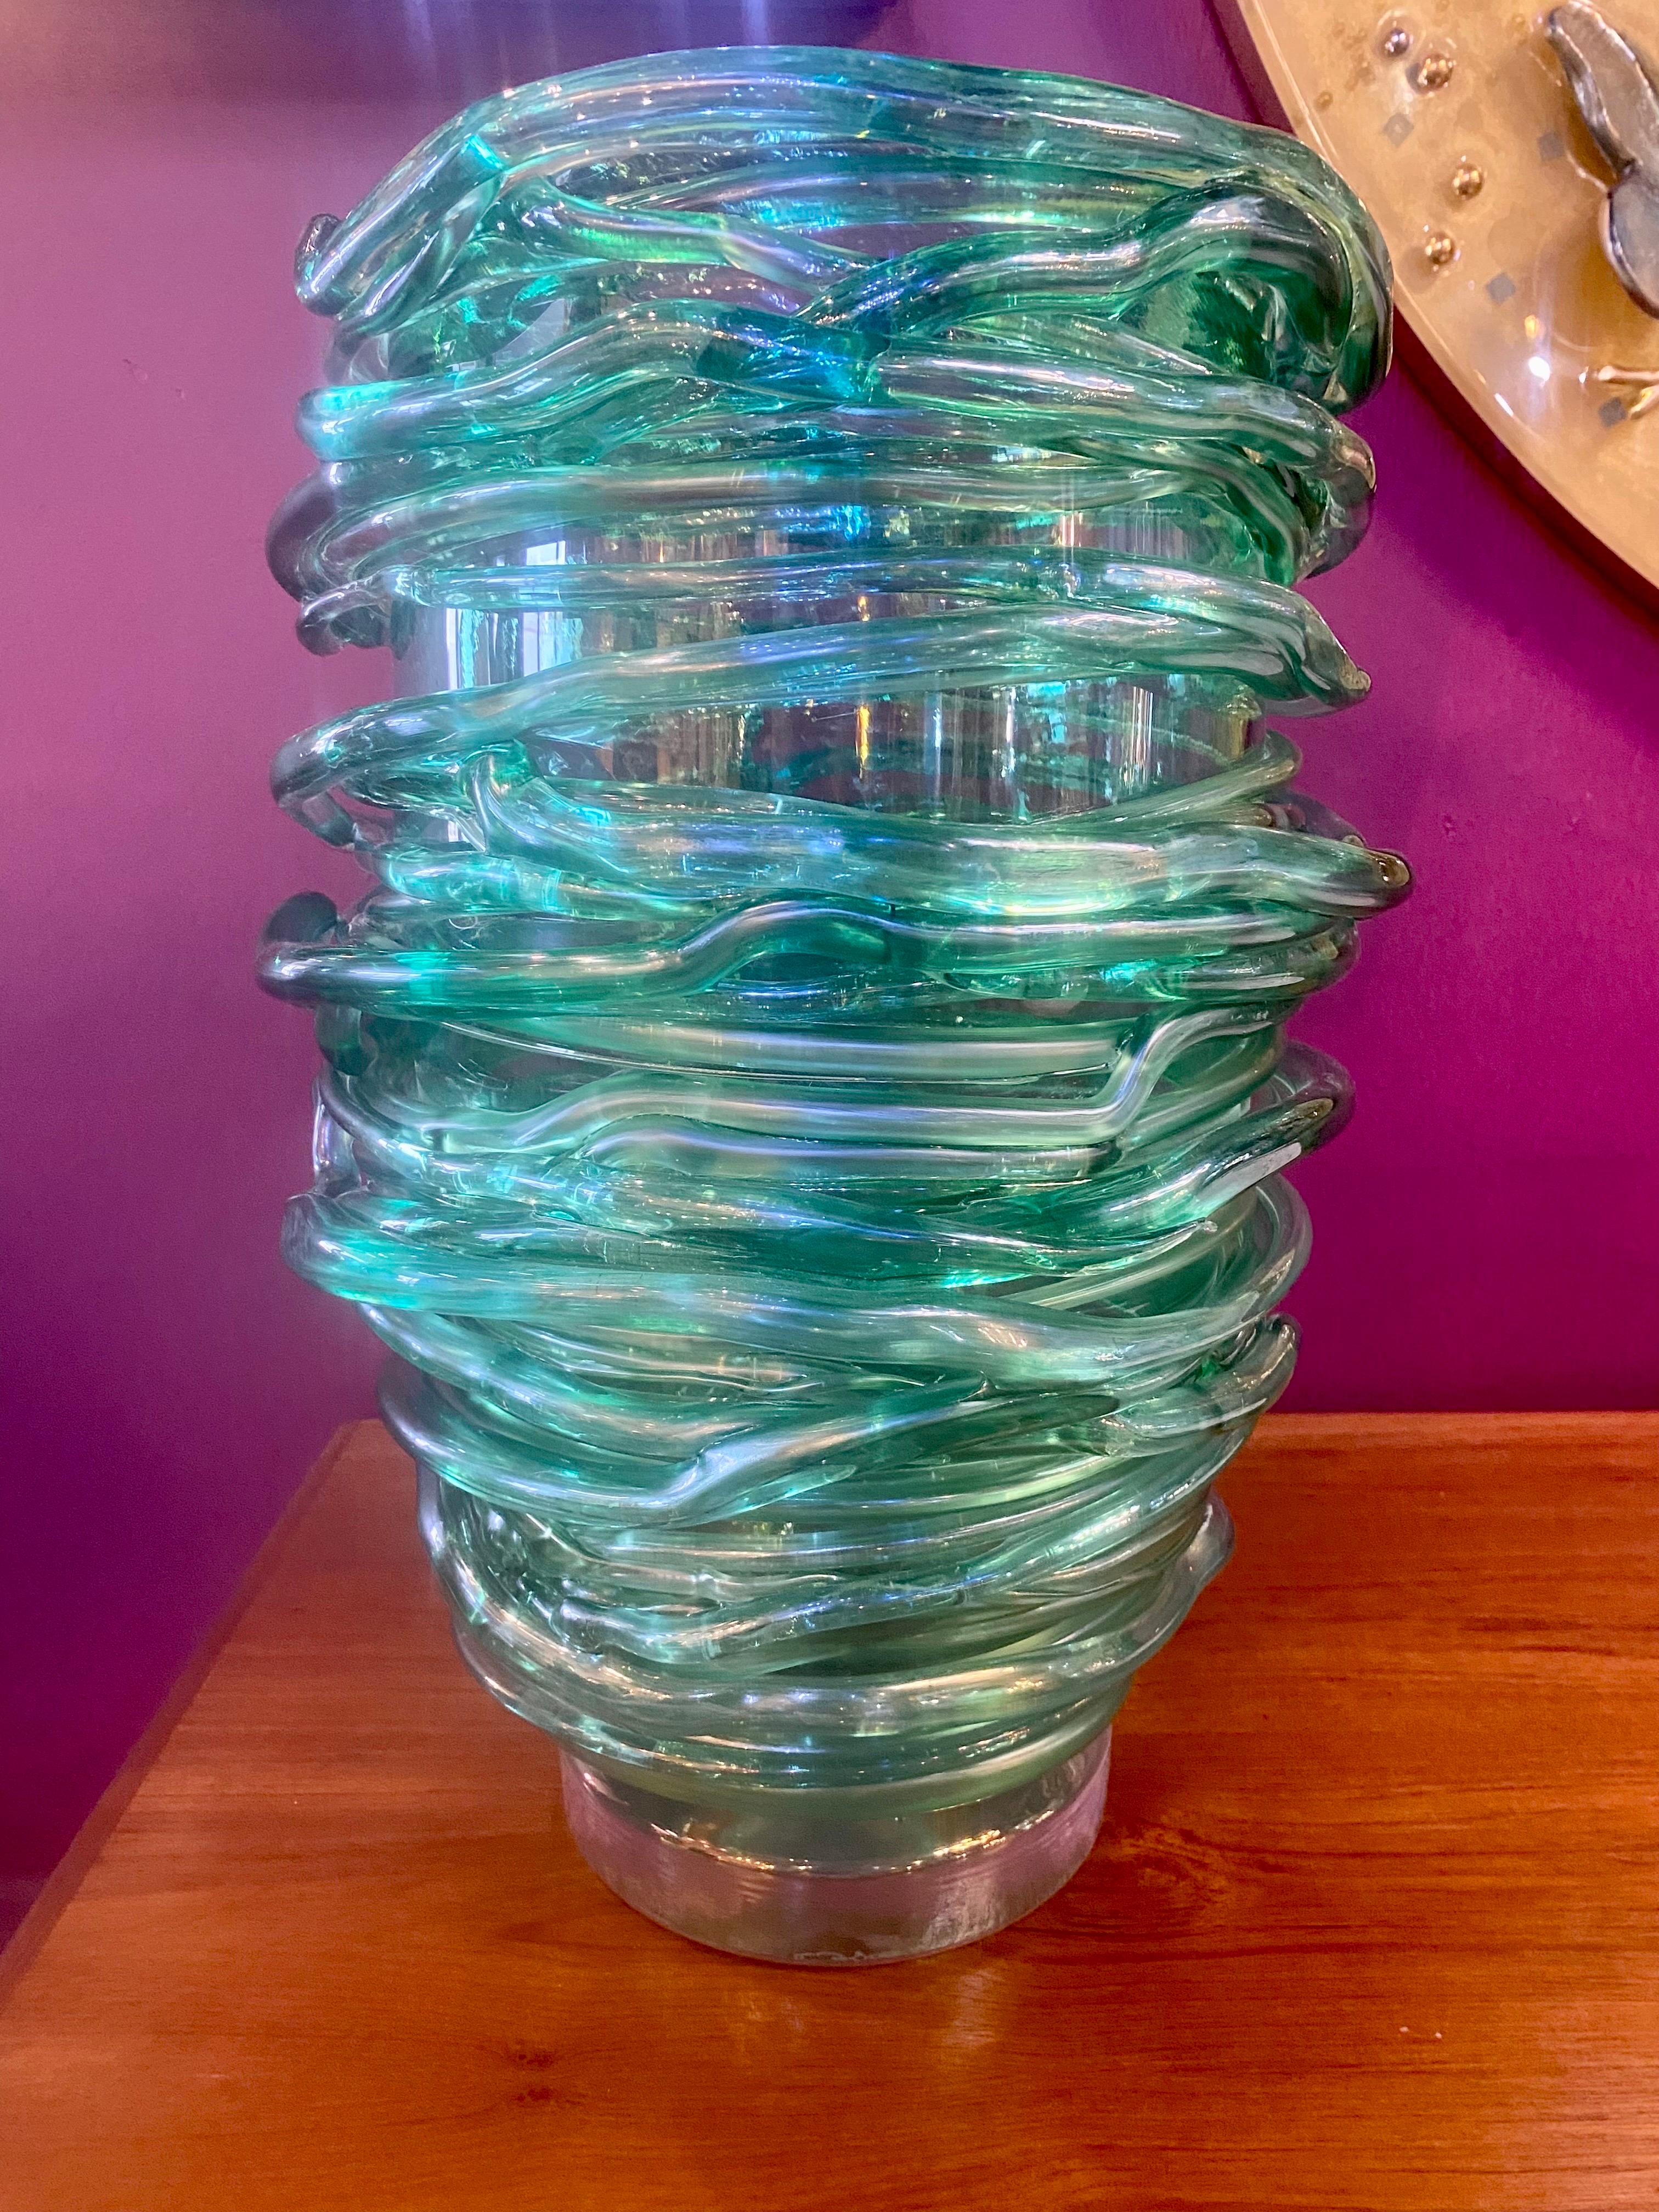 Pair of exquisite large Murano Italian Vases with Clear and Emerald Green Blown Glass Swirls with Hot Applications to Create Abstract Beauty!!
Signed.